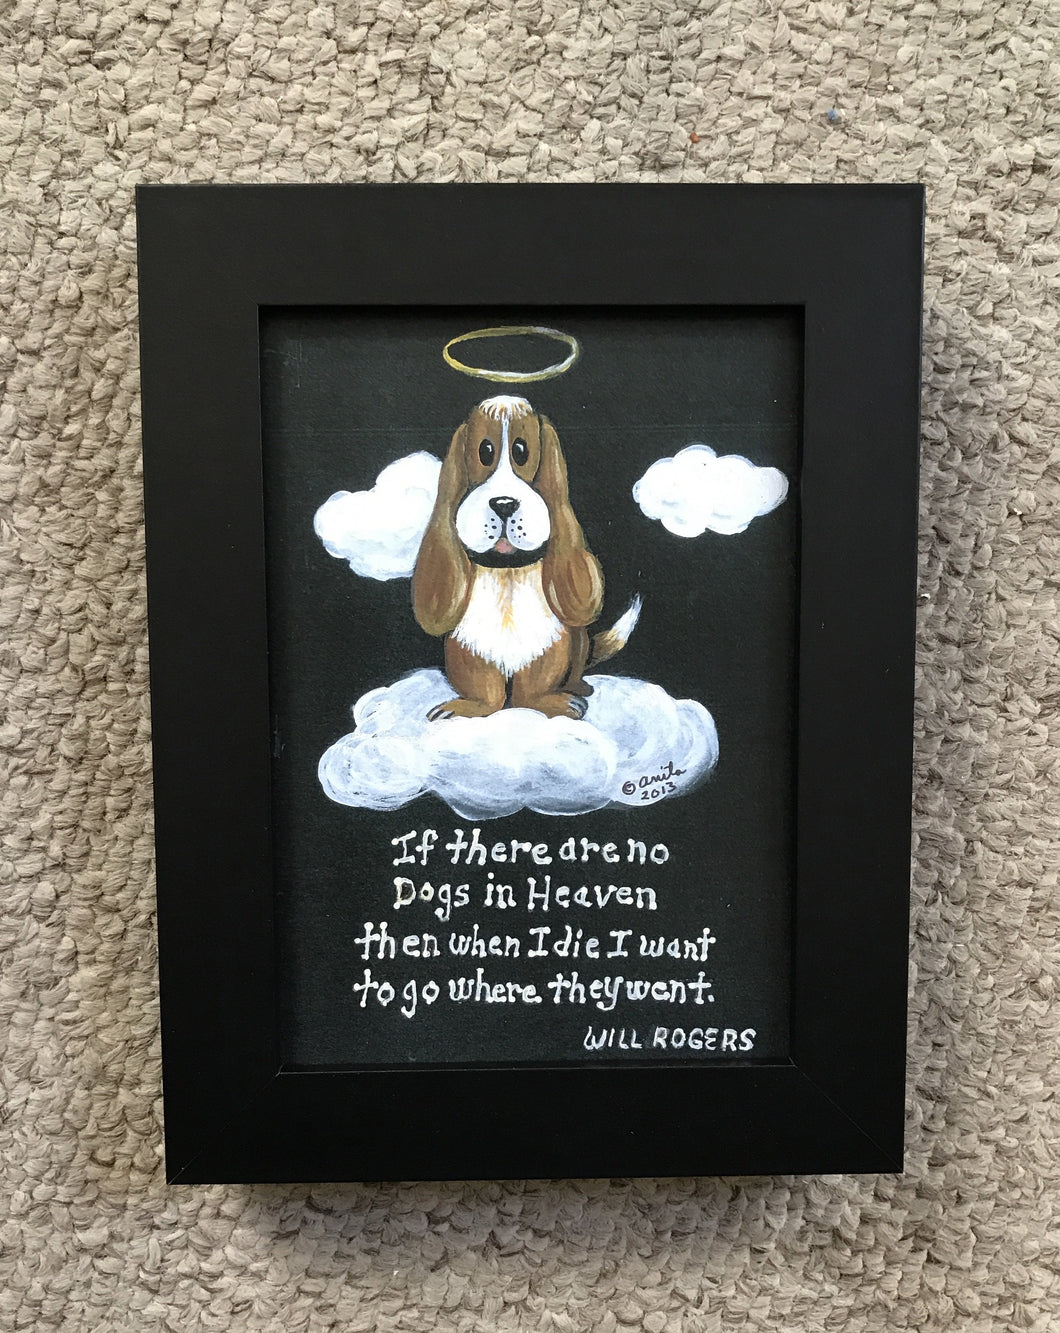 Dog quote by Will Rogers. 5x7”